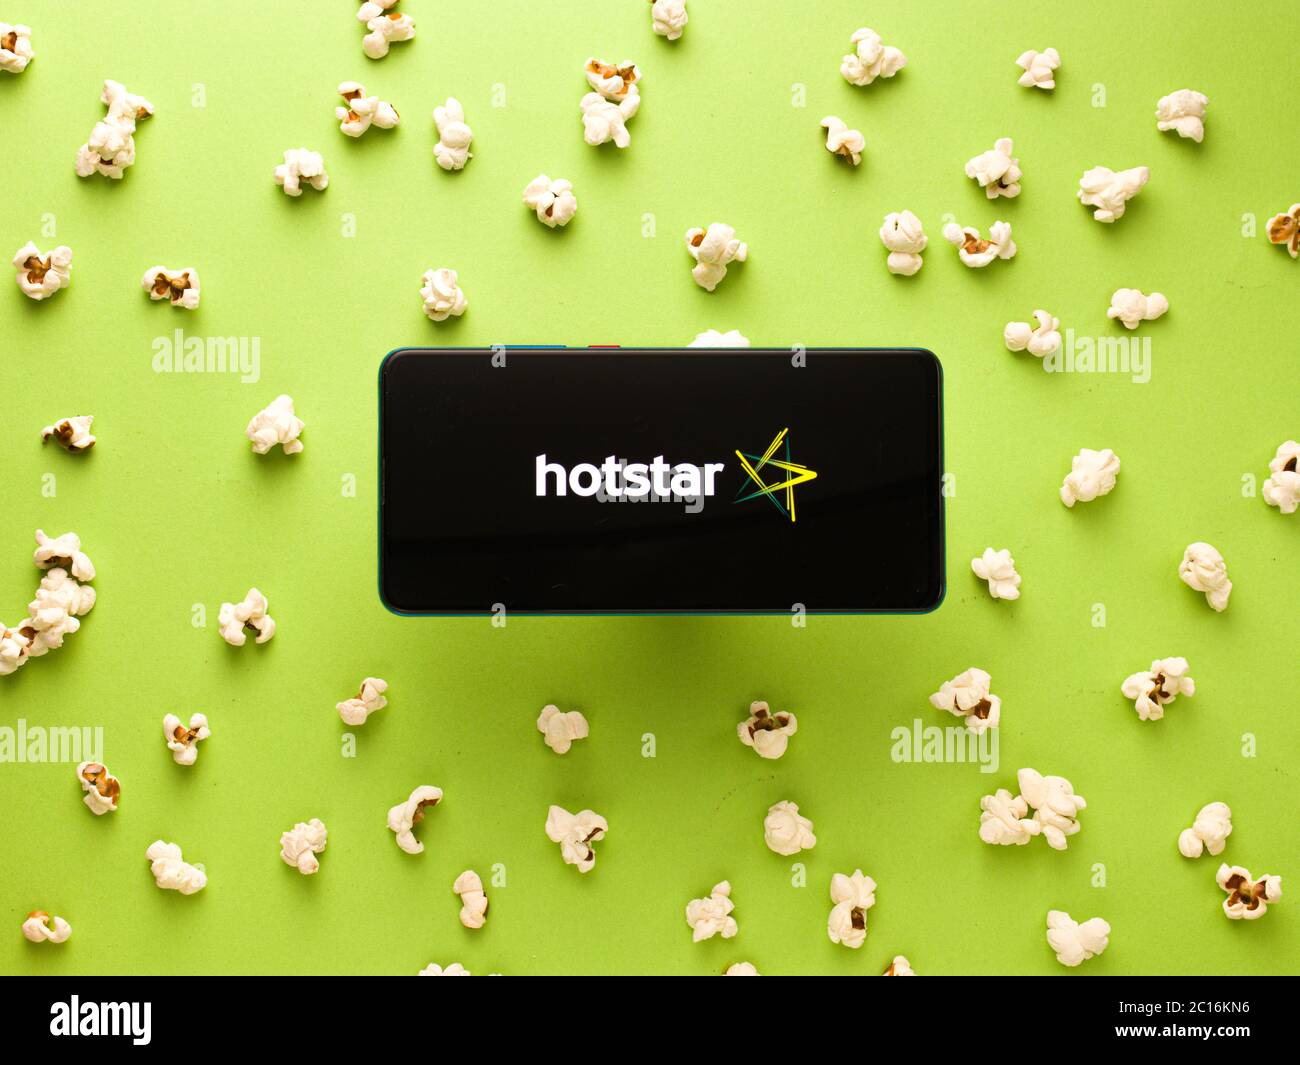 Hotstar mobile app logo - a video streaming service photographed for stock